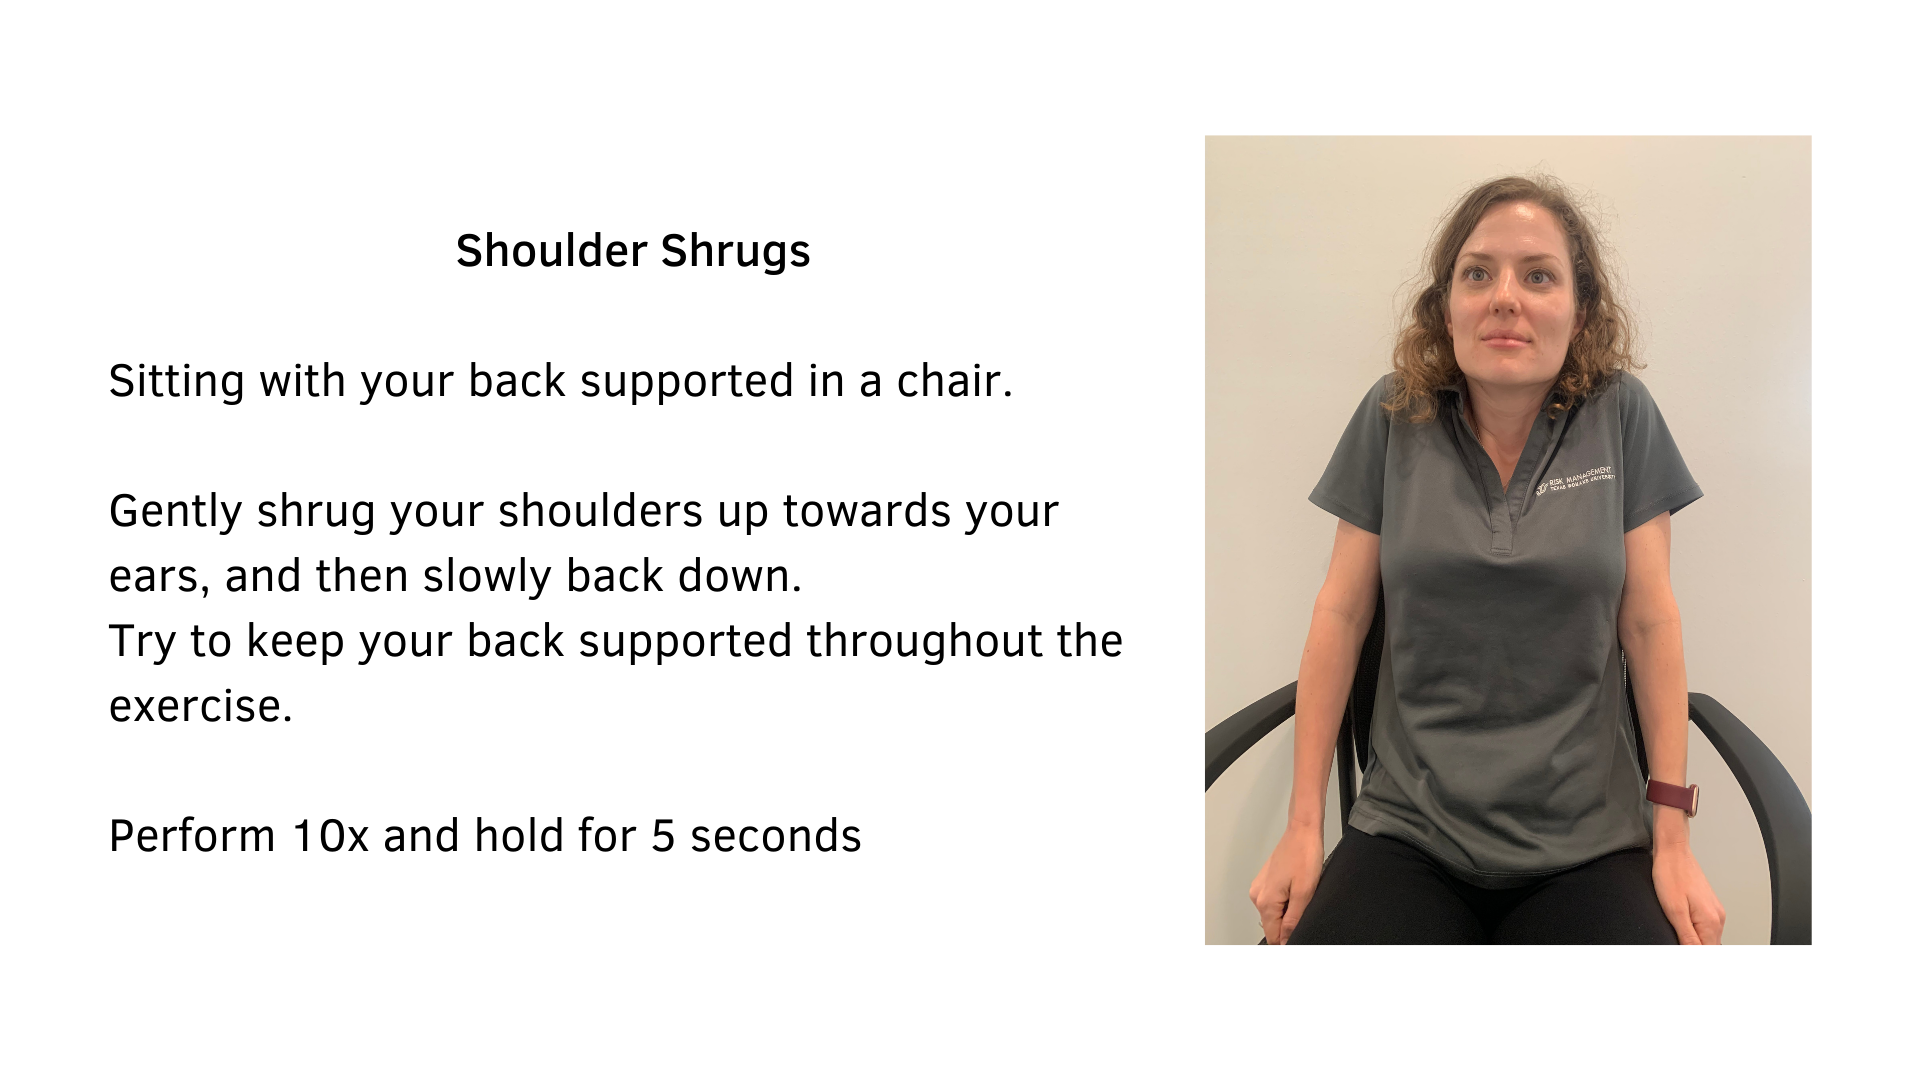 Black text on a white background that reads, "Shoulder Shrugs: Sitting with your back supported in a chair. Gently shrug your shoulders up towards your ears, then slowly back down. Try to keep your back supported throughout the exercise. Perform 10x and hold for 5 seconds". A picture of a woman performing the stretch is featured.